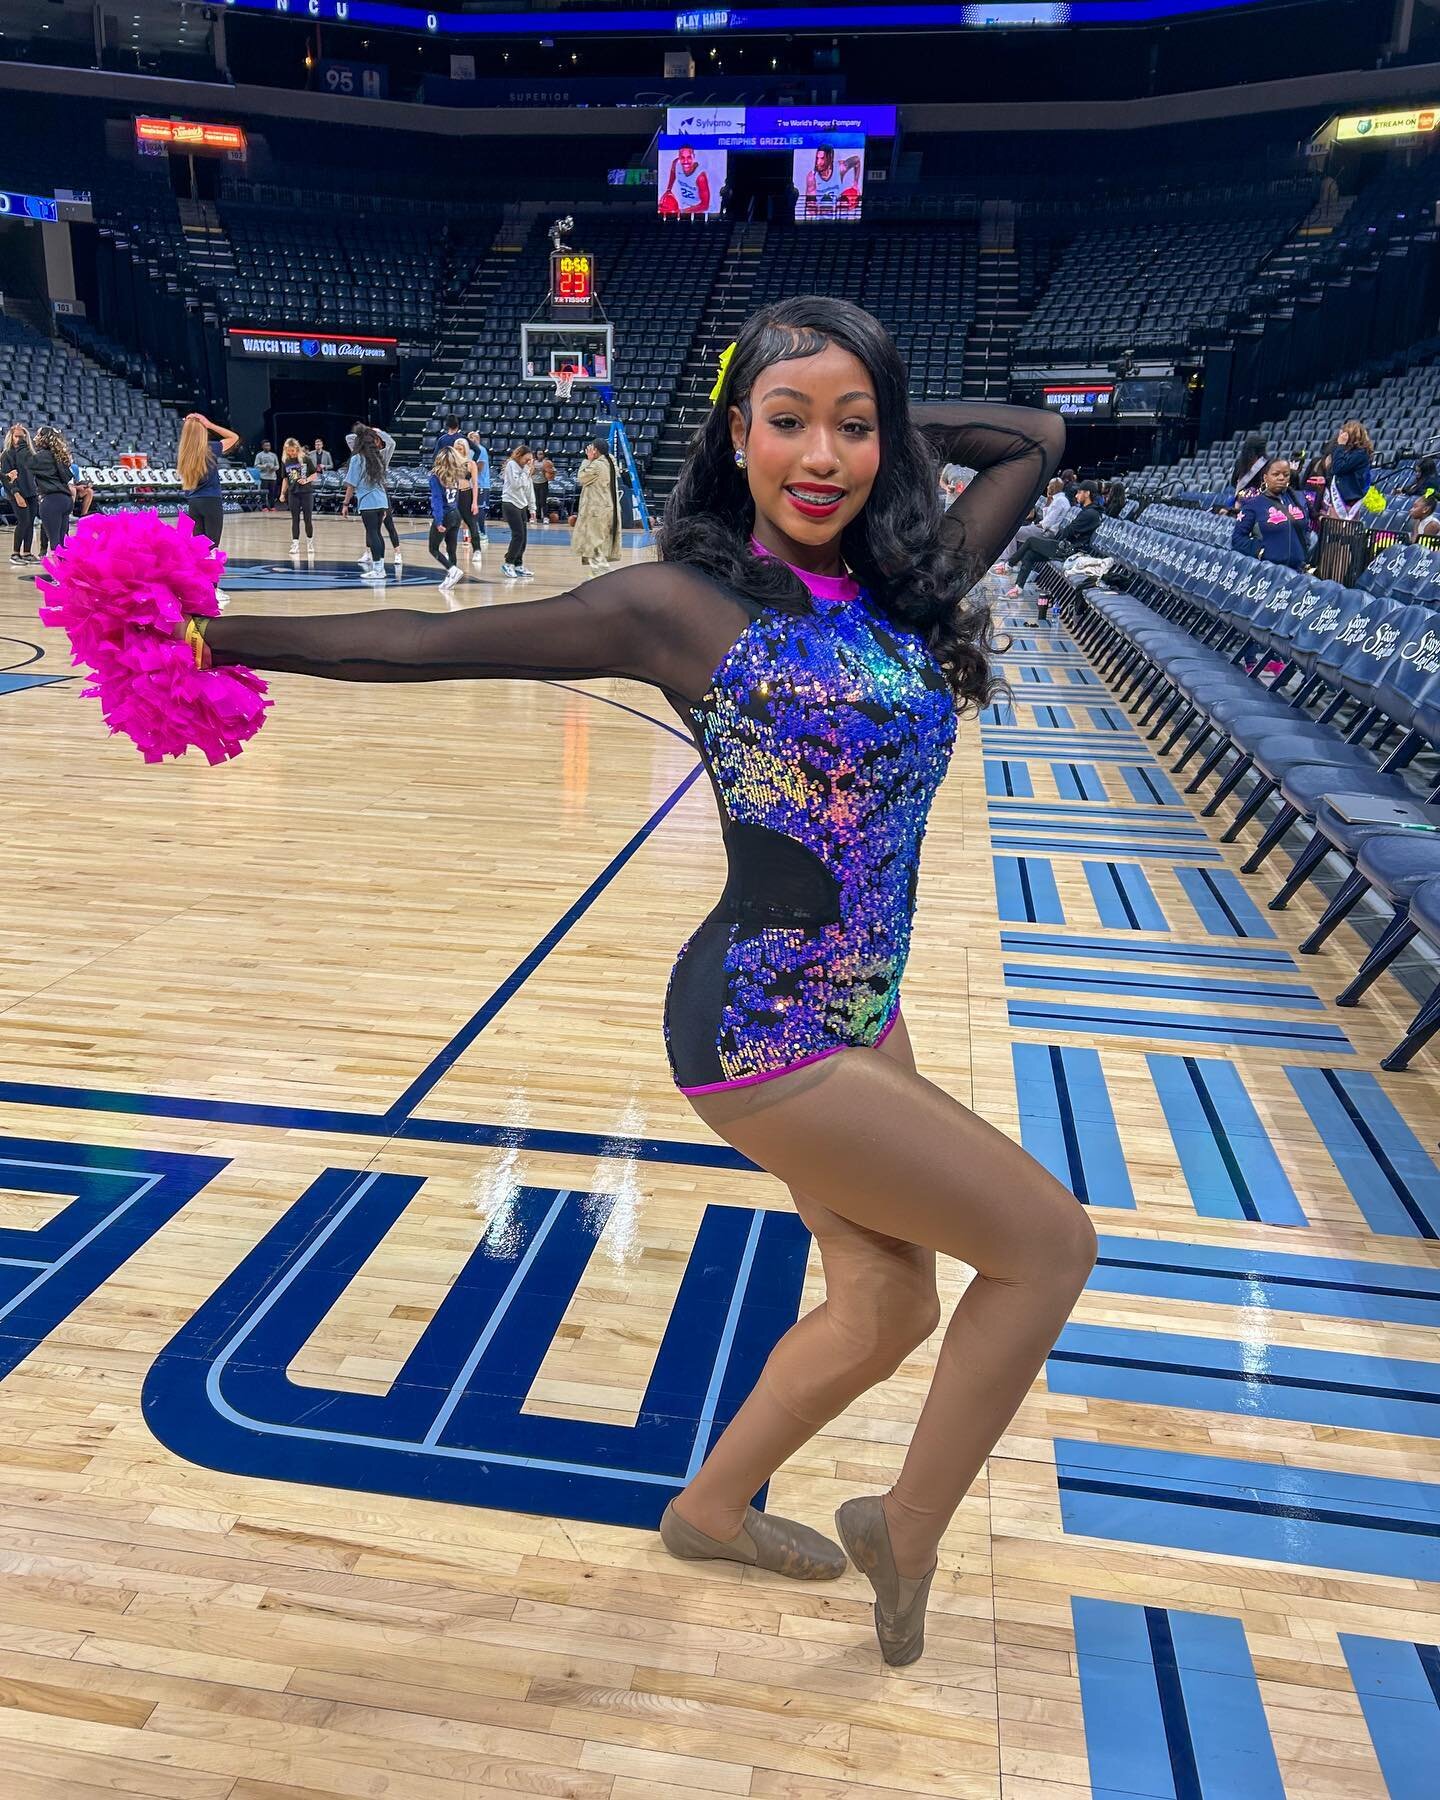 Sereniti Janae, one of our Southern Belles serving nothing but FACE and ATTITUDE! 🩷💙

#explorepage #majorette #prettybrowndancers #viral #views #dancers #explorepage #majorette #prettybrowndancers #viral #views #dancers #majorettemadness #majorette